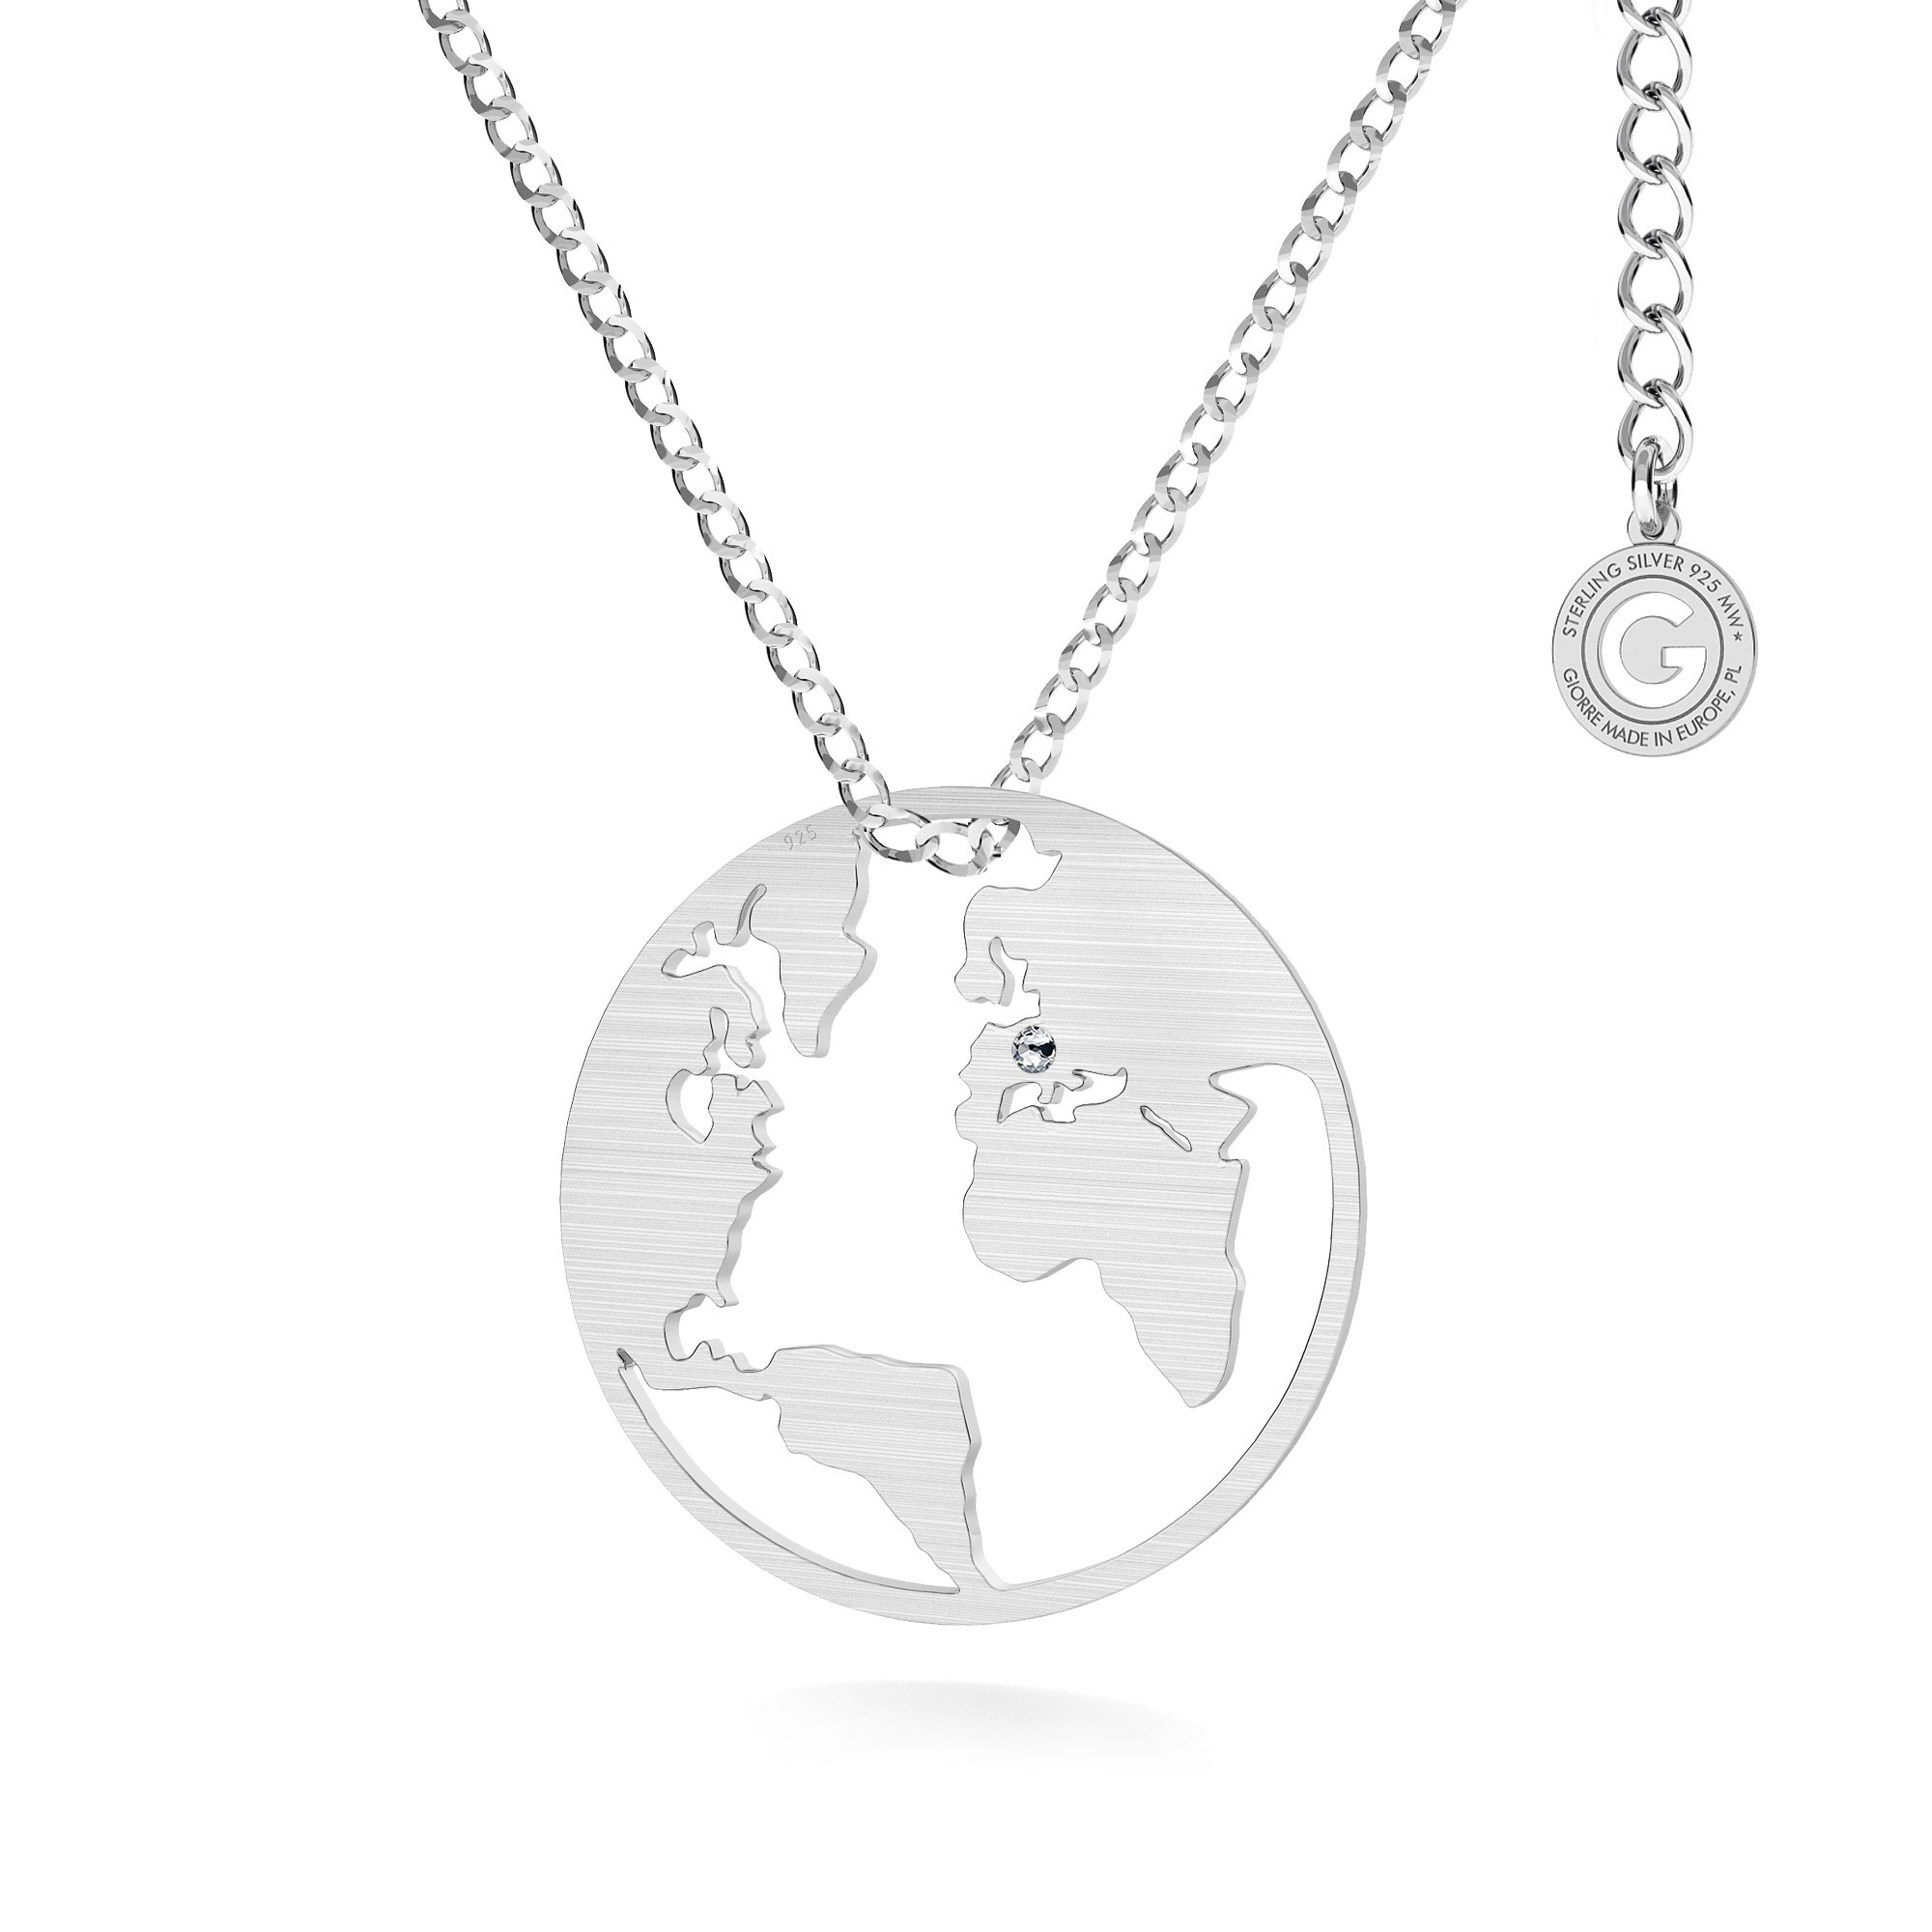 T°ra'vel'' Necklace - Globe, Silver 925 curb chain